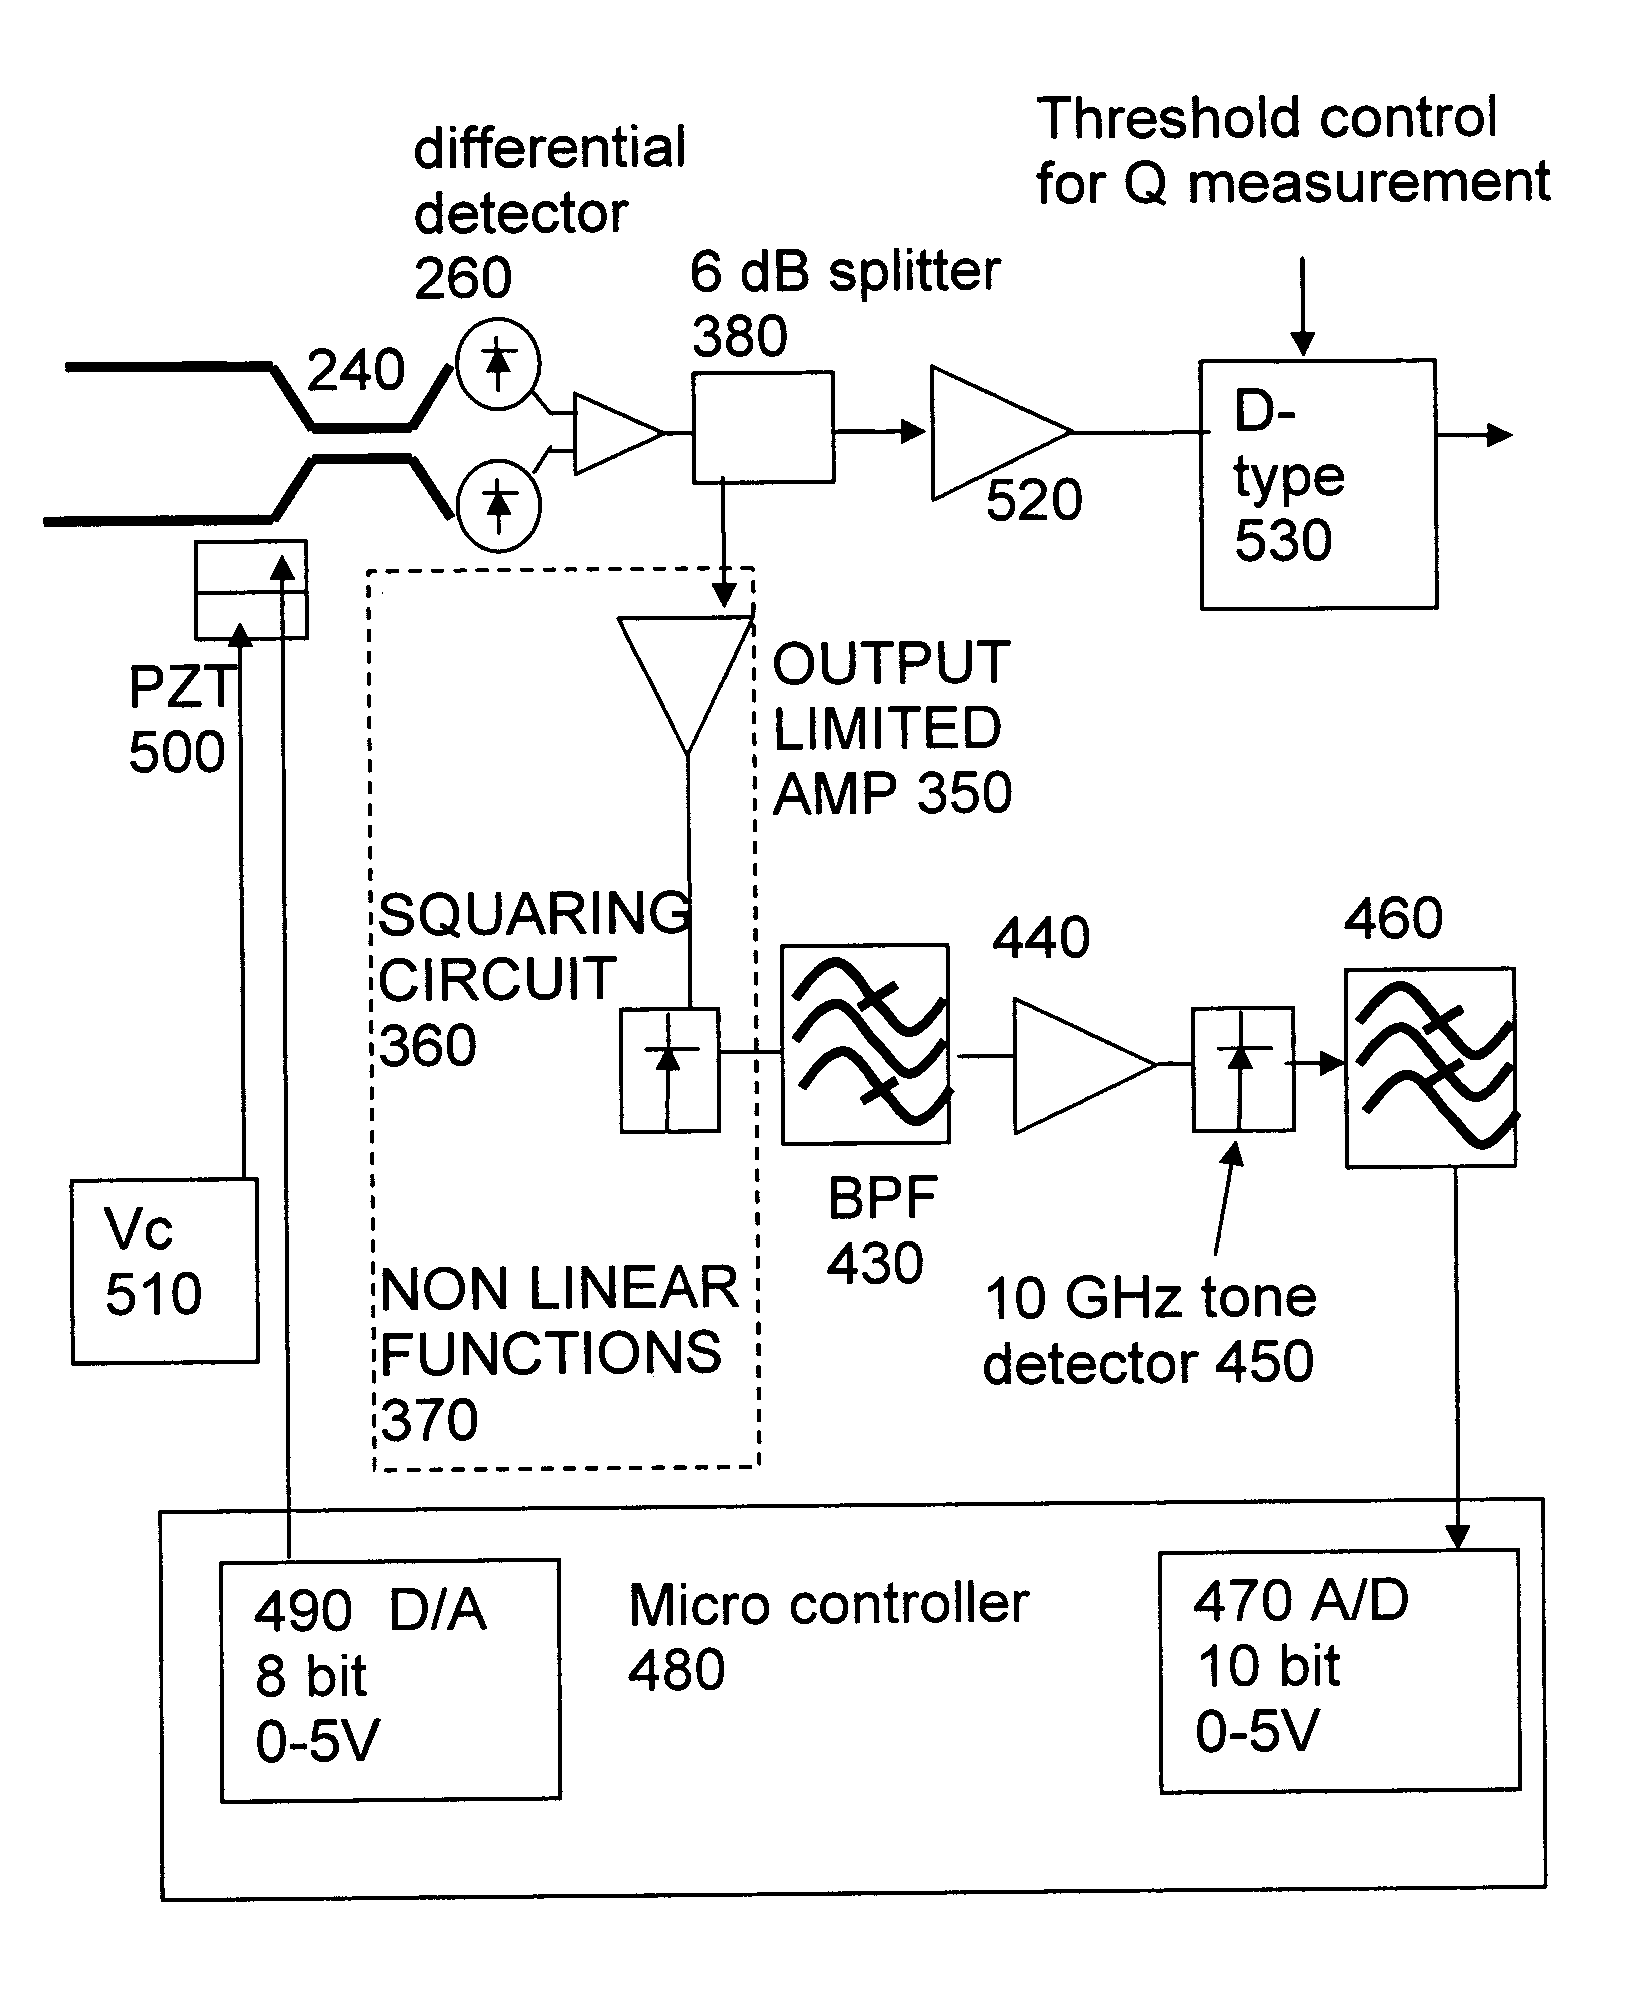 DQPSK receiver phase control